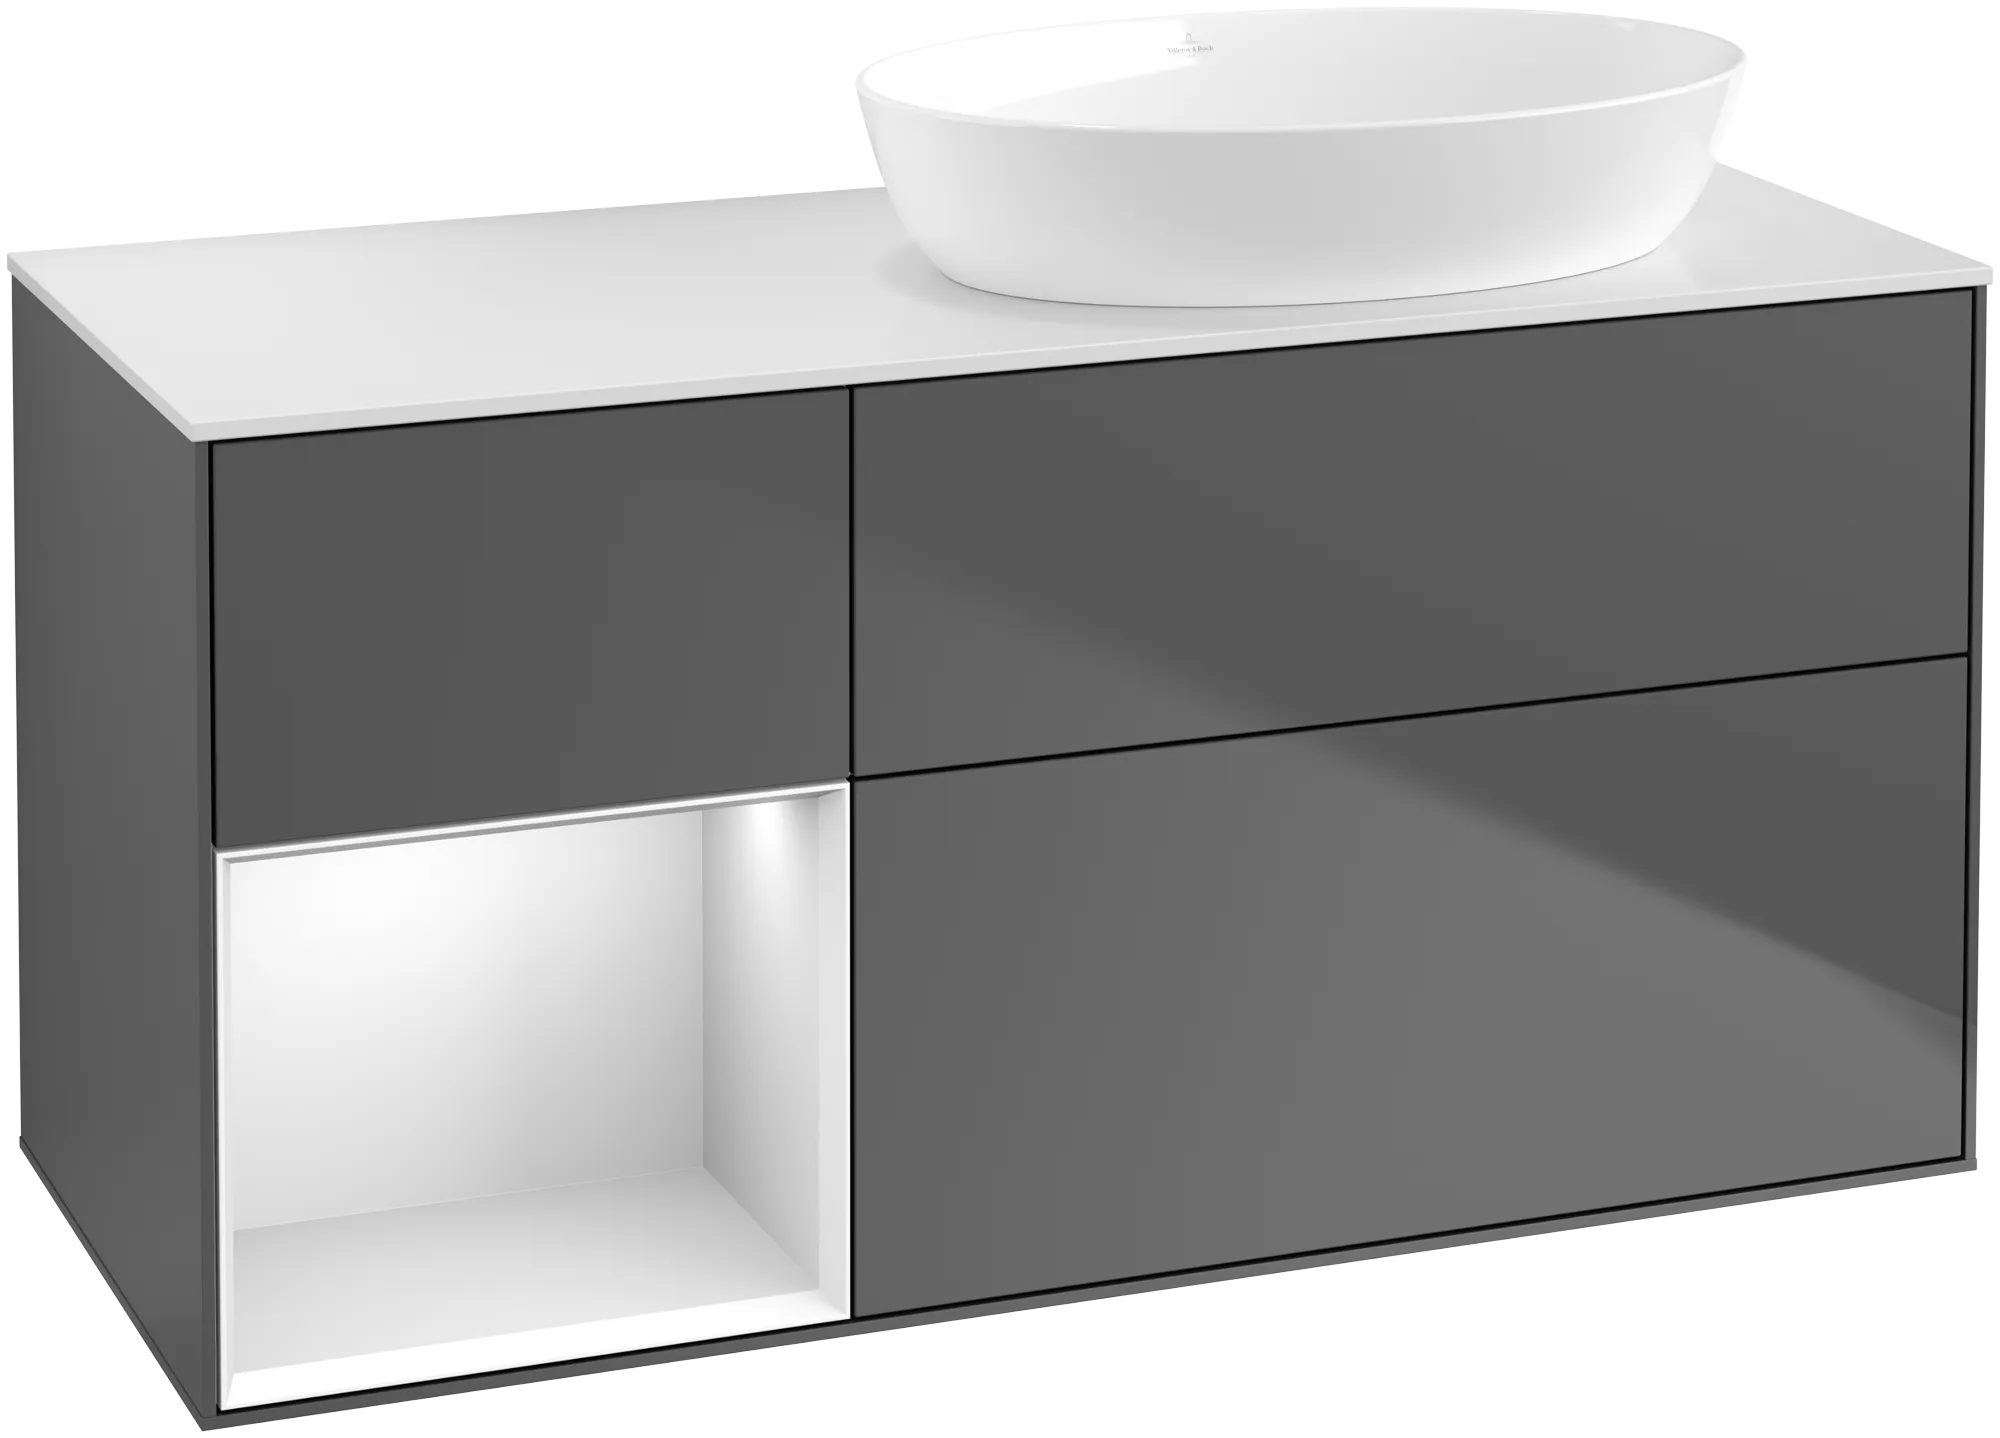 Picture of VILLEROY BOCH Finion Vanity unit, with lighting, 3 pull-out compartments, 1200 x 603 x 501 mm, Anthracite Matt Lacquer / White Matt Lacquer / Glass White Matt #GA41MTGK